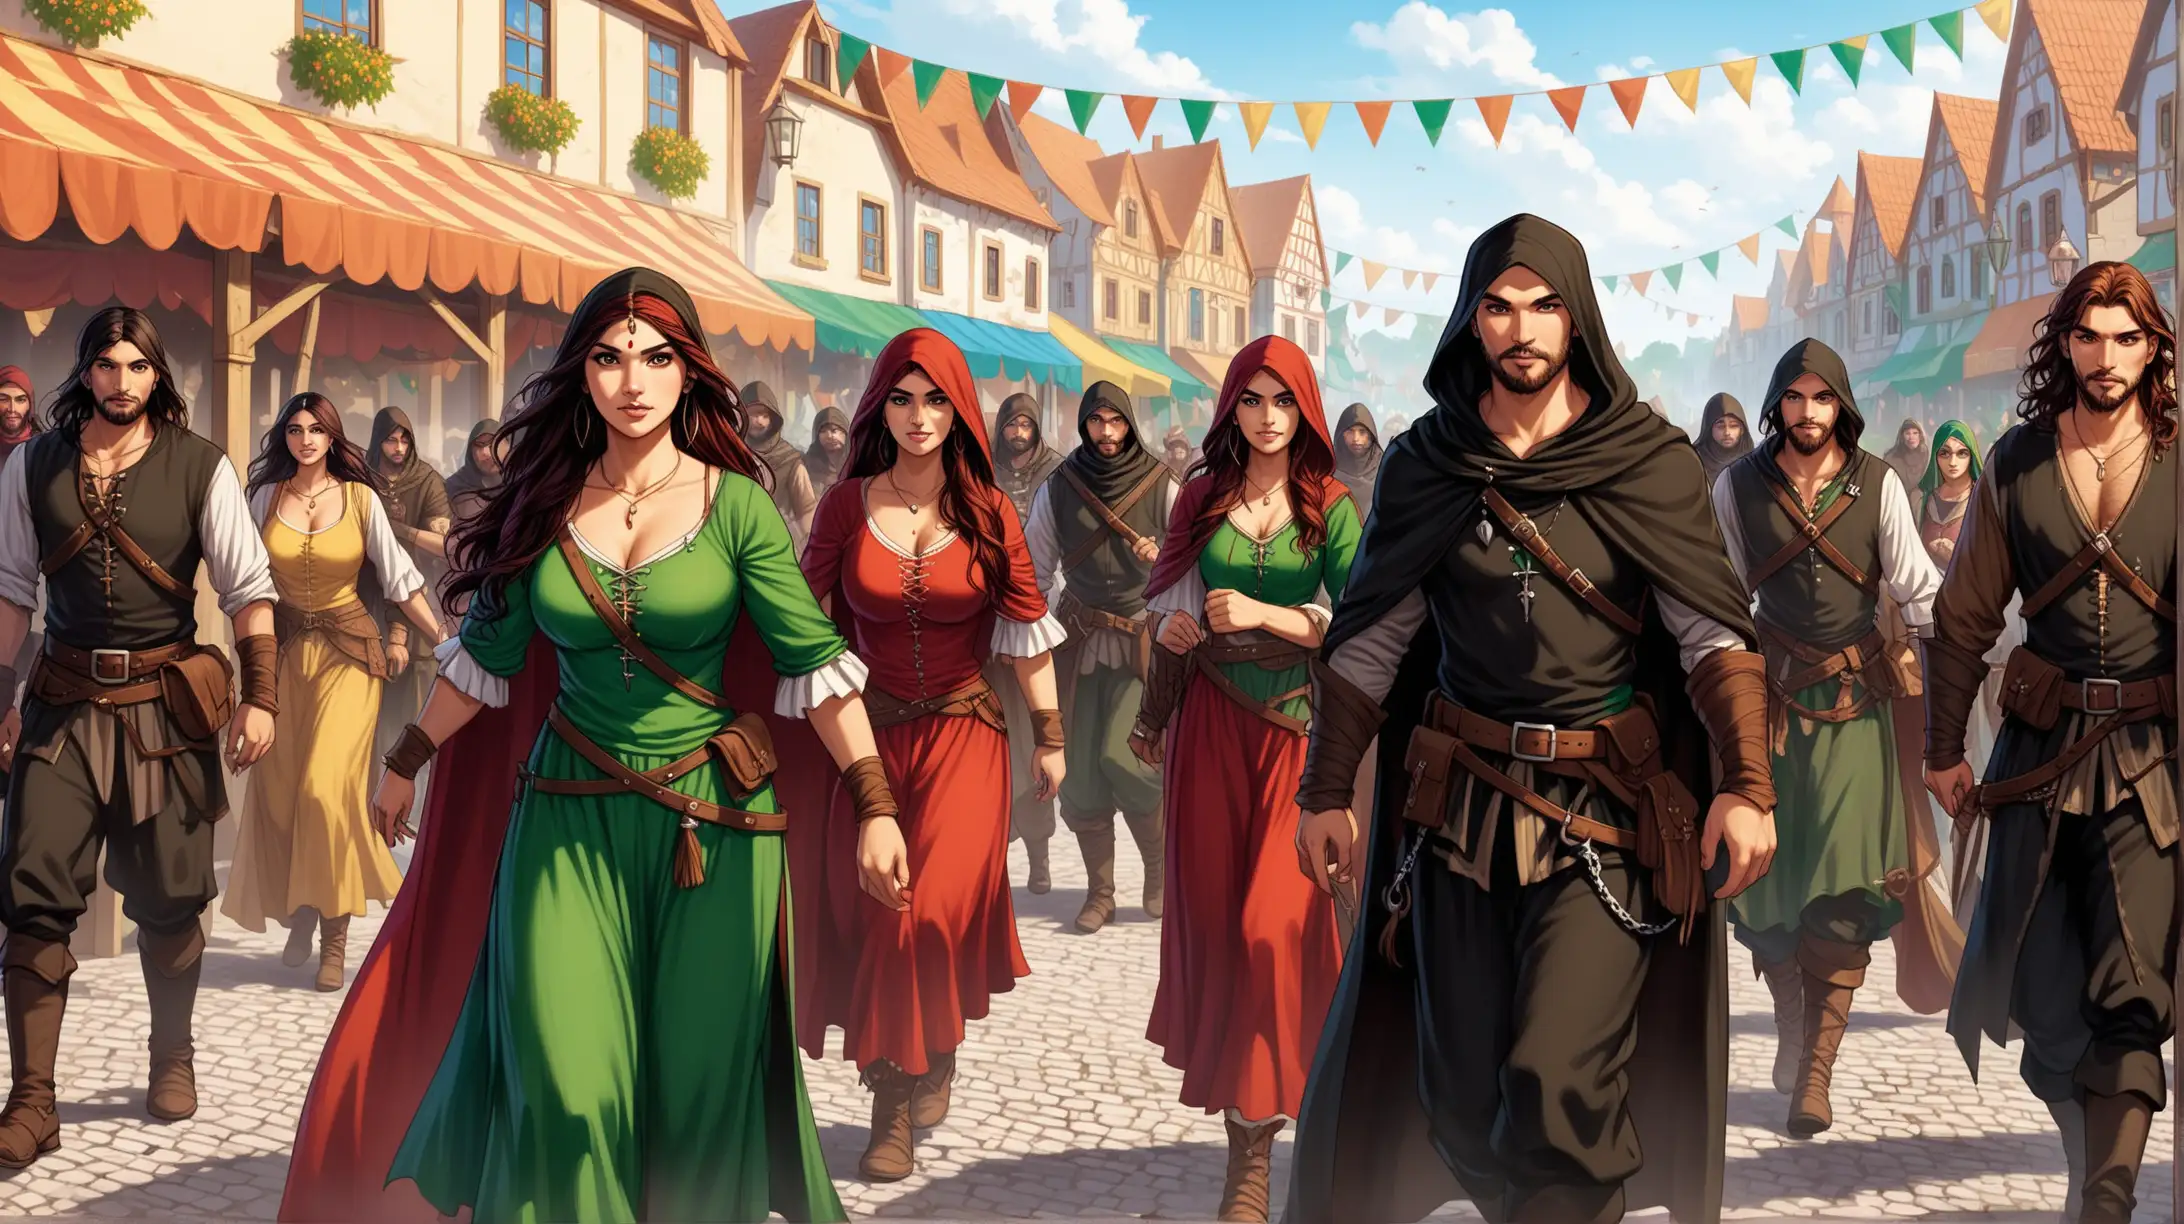 Medieval Fantasy Crew at the Town Carnival Gypsy Romani Irish Thieves Seers and Warlocks